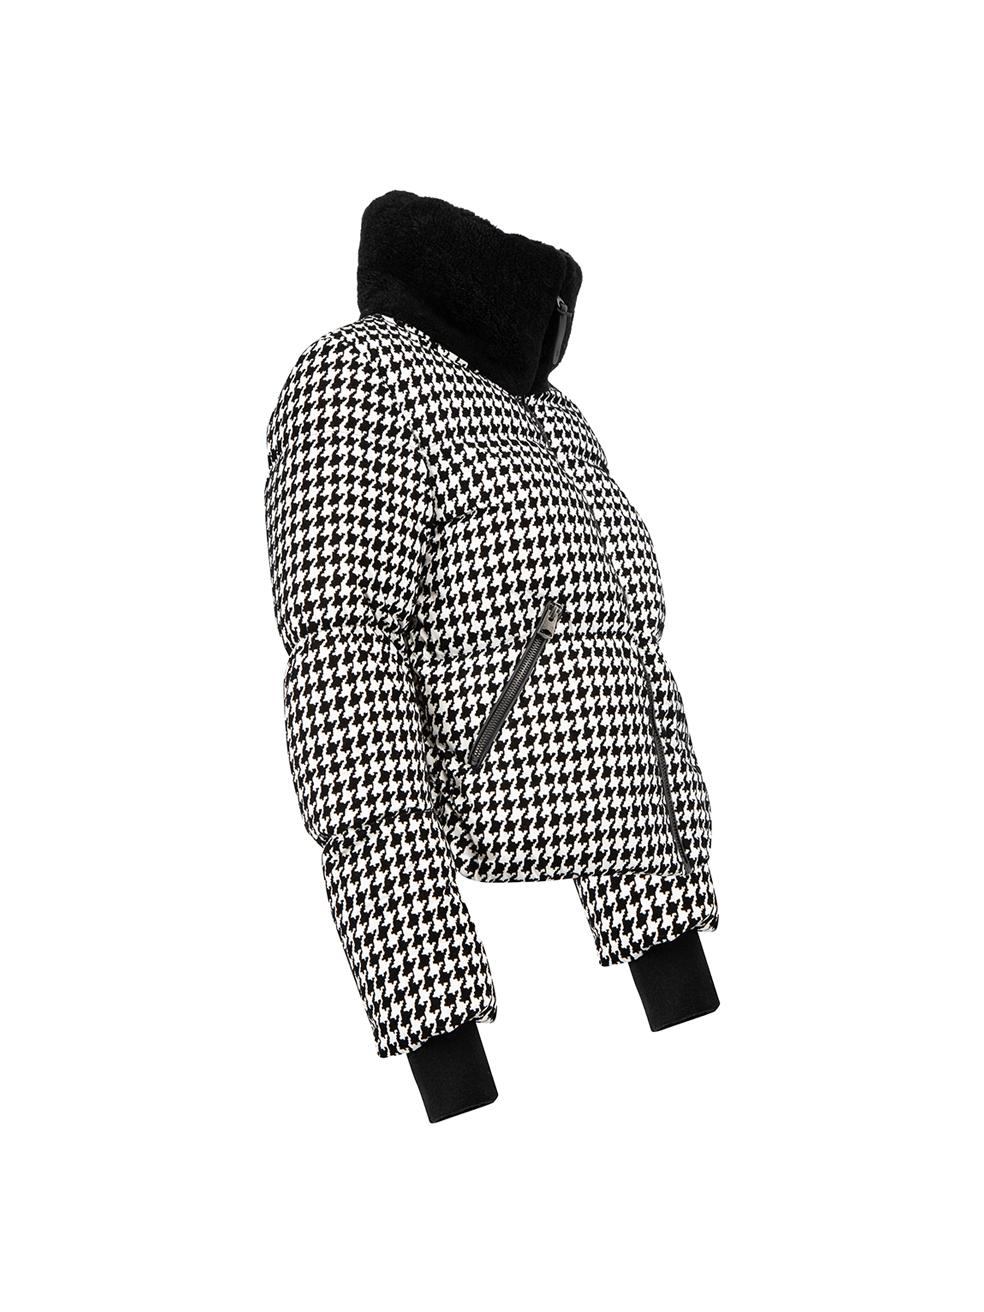 CONDITION is Very good. Hardly any visible wear to jacket is evident on this used Mackage designer resale item. Details Black Leather and white Down jacket Short length Houndstooth pattern Ribbed knit cuffs Front zip closure Black shearling on